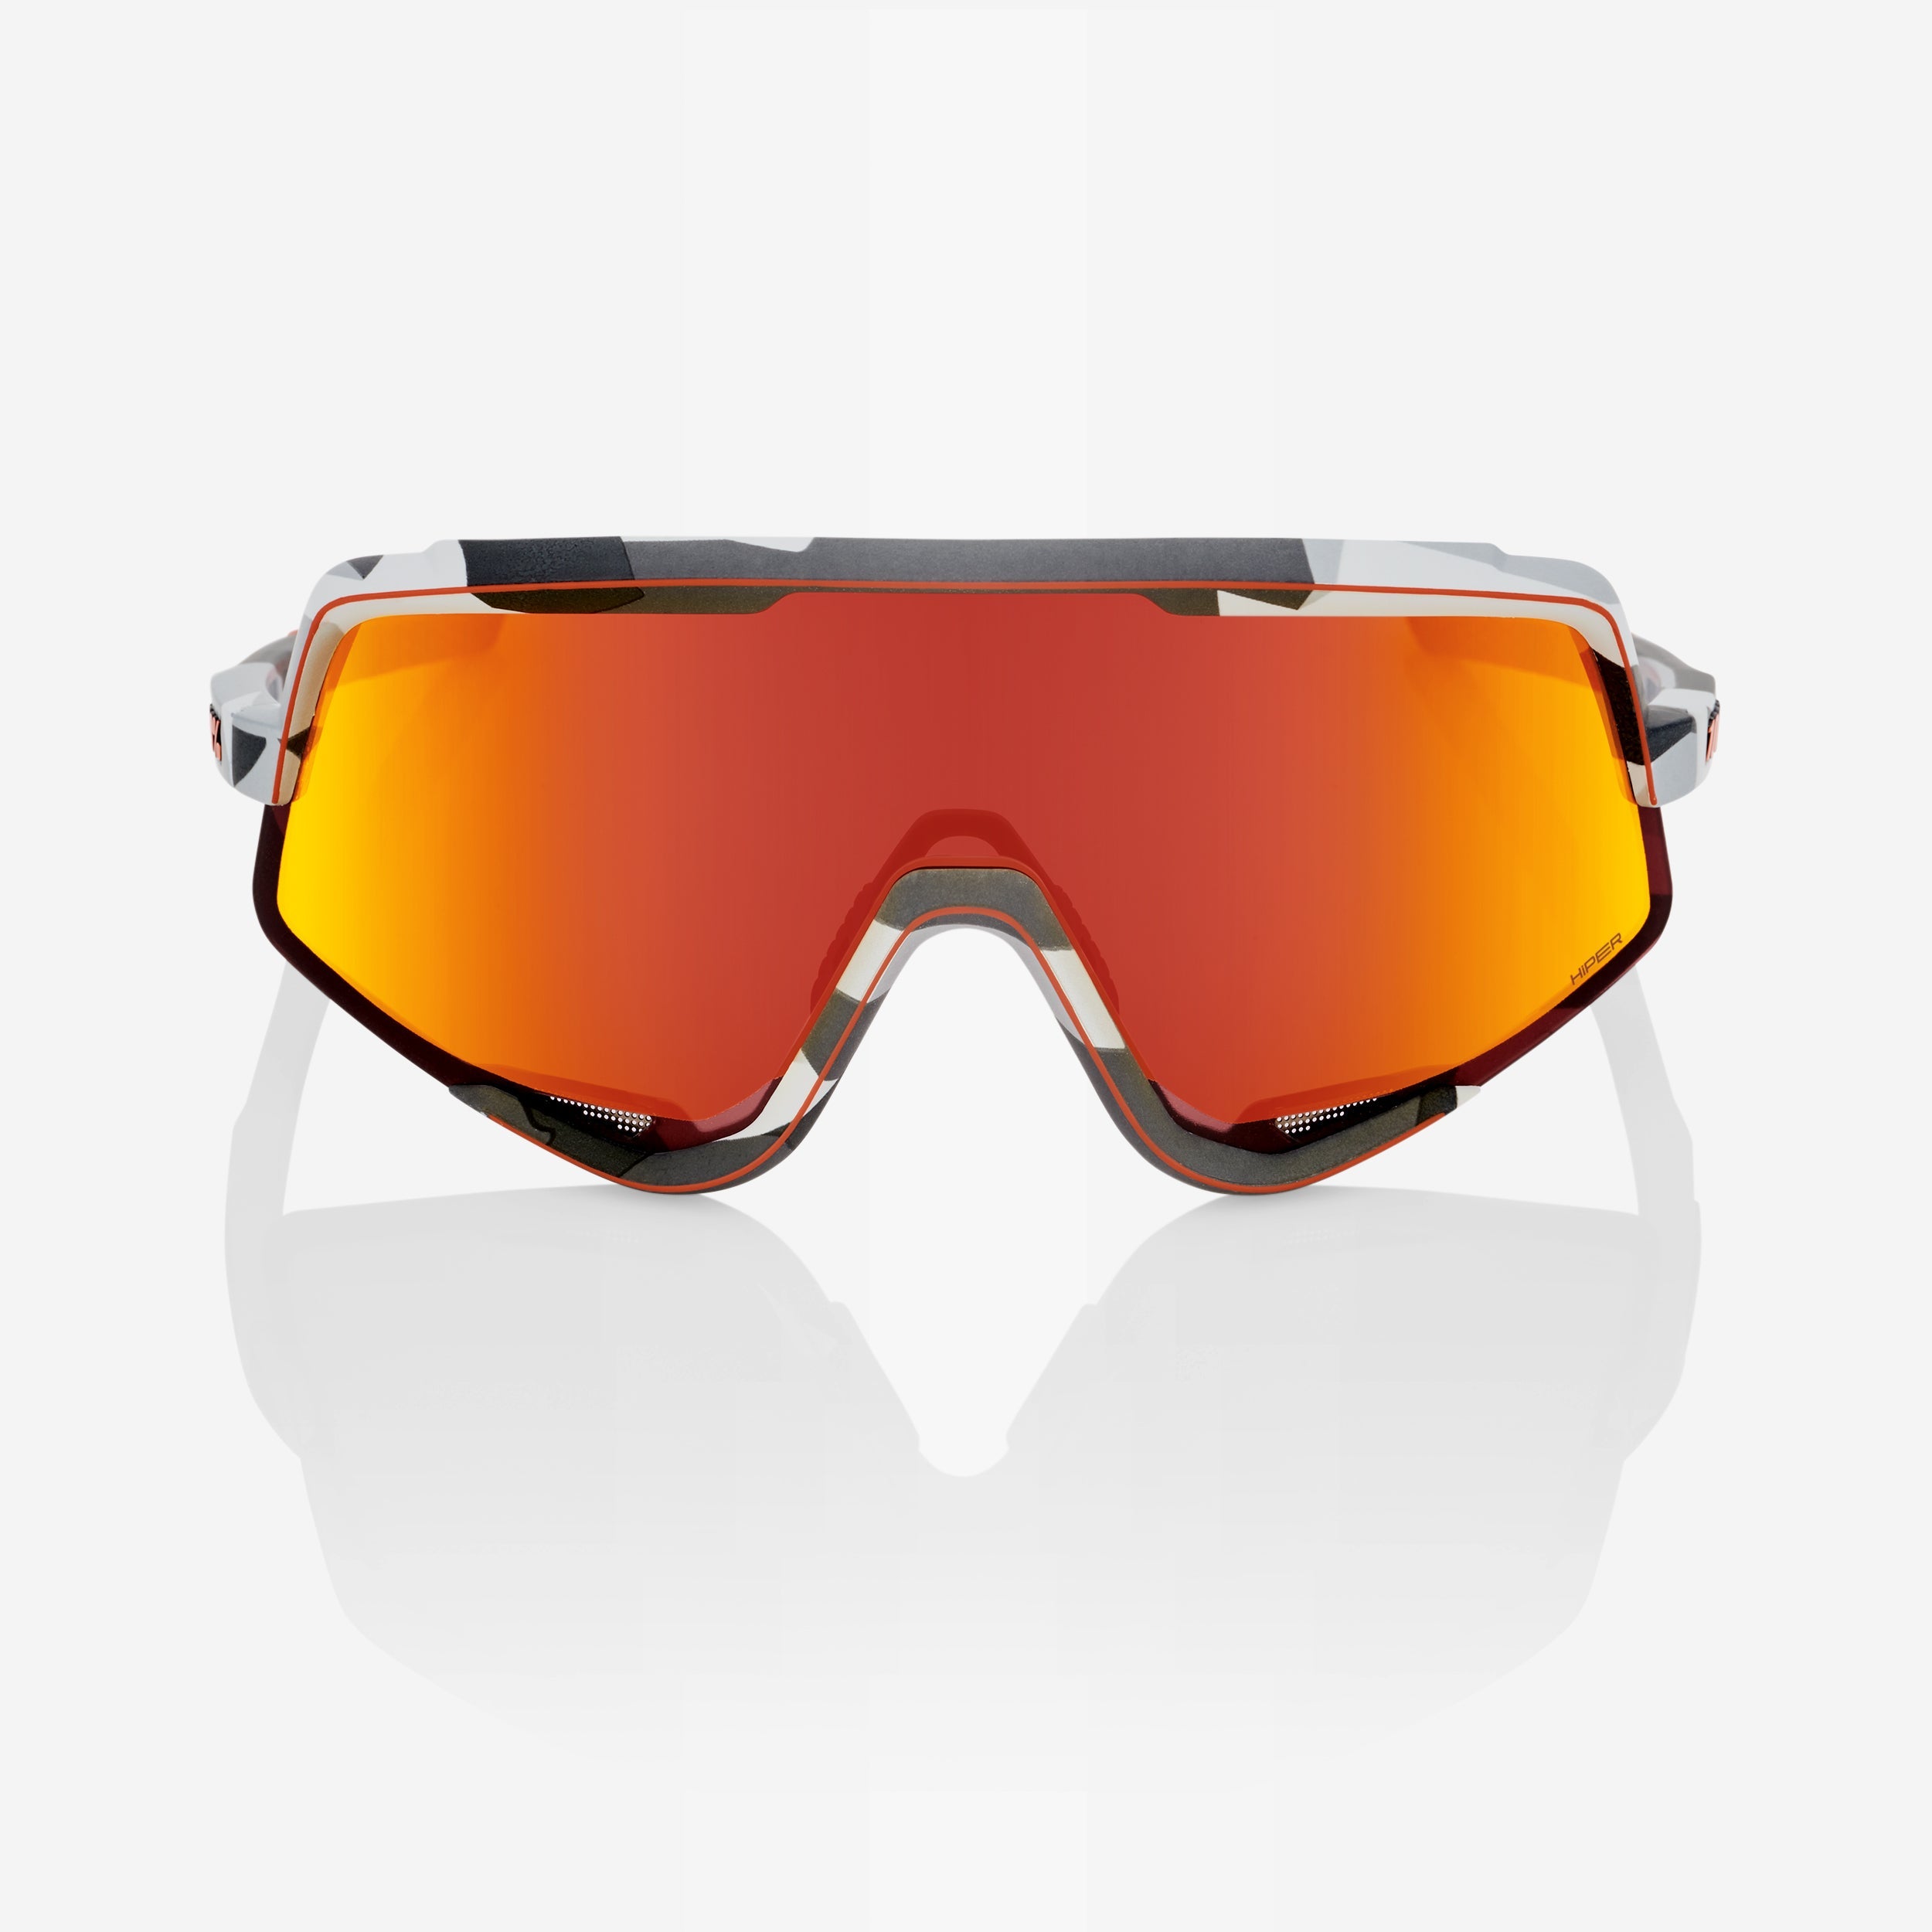 GLENDALE® - Soft Tact Grey Camo - HiPER® Red Multilayer Lens - Secondary